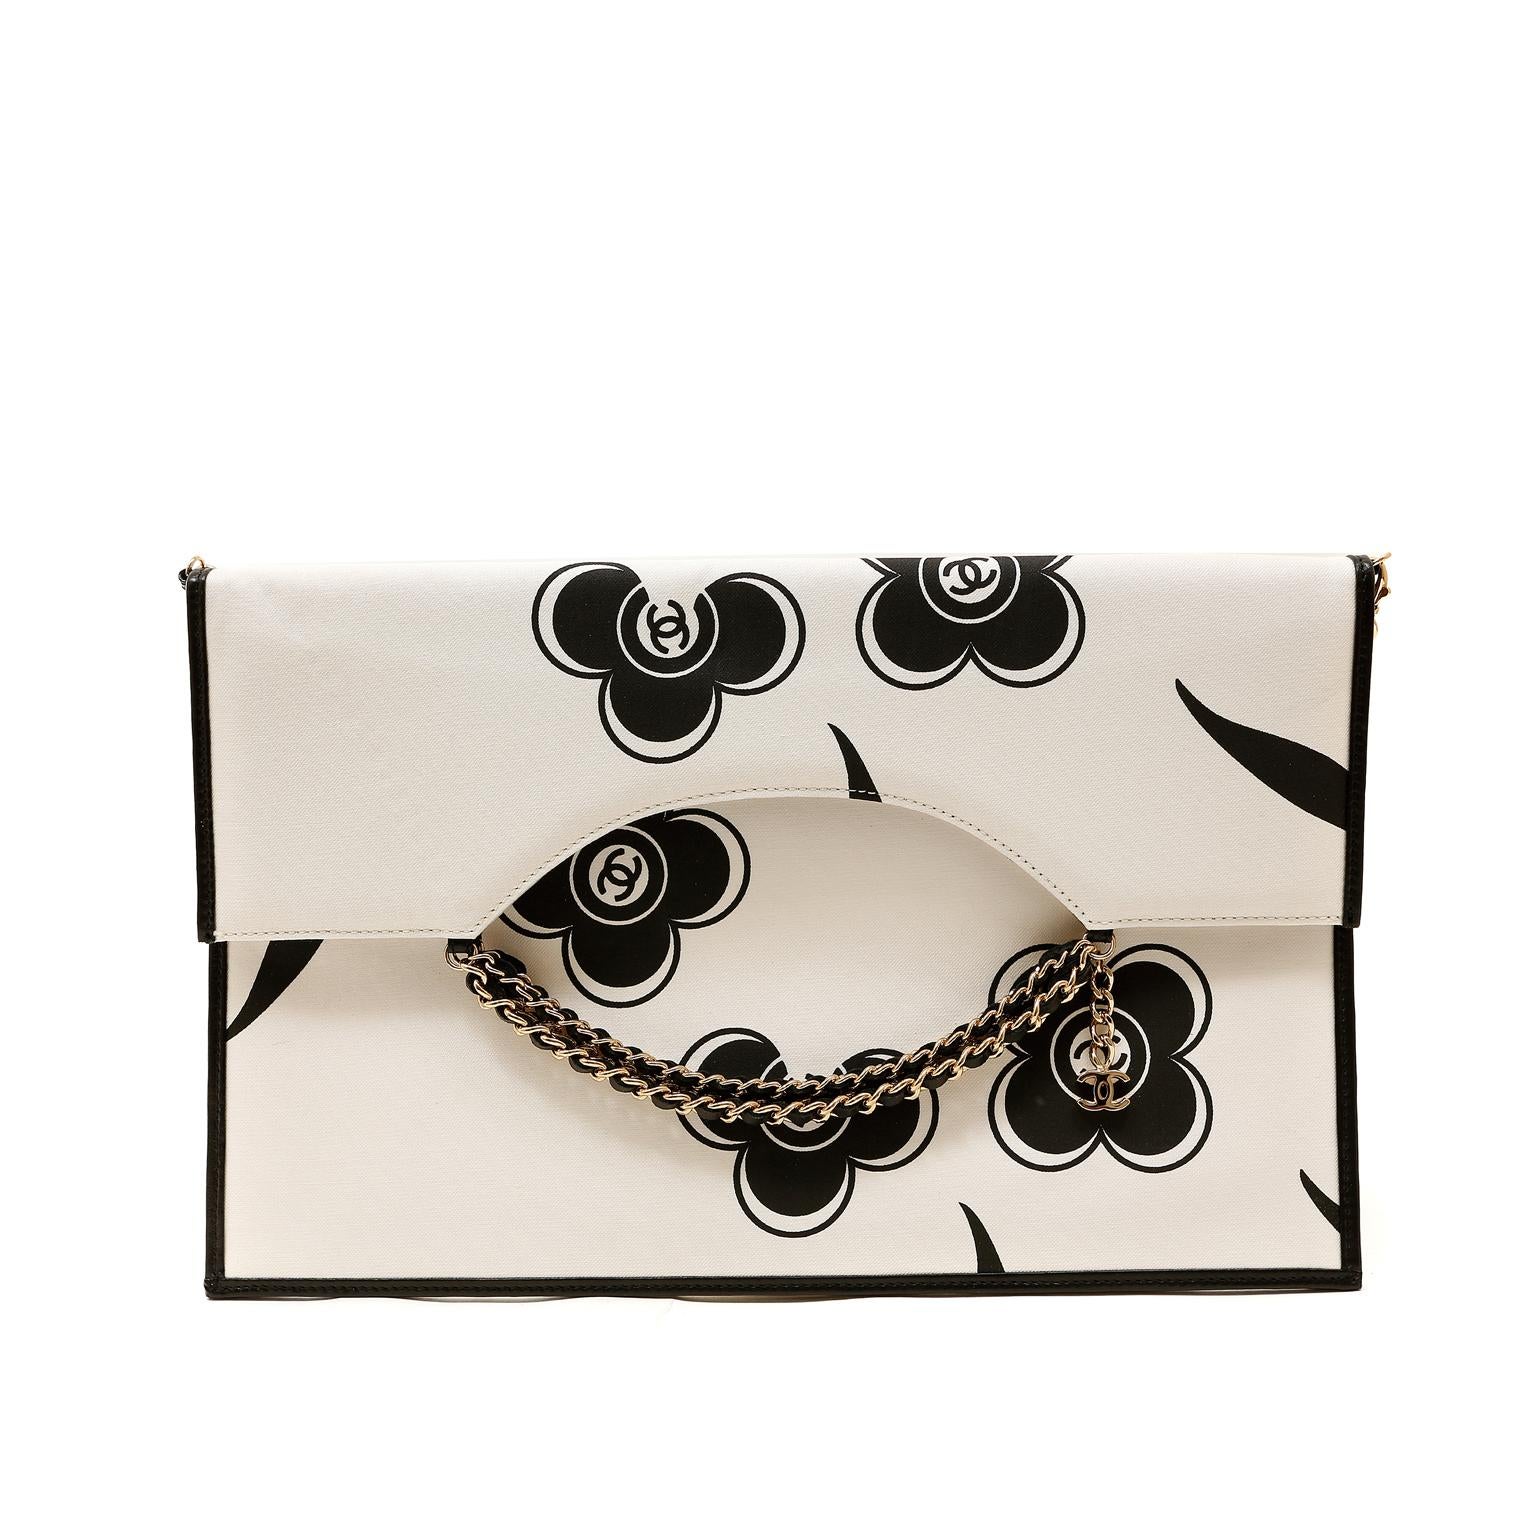 This authentic Chanel Ivory and Black Camellia Envelope Clutch is in pristine condition.  The contrasting neutrals and chain details make this versatile bag a brilliant complement to any ensemble.  
Ivory fabric slim envelope clutch has black